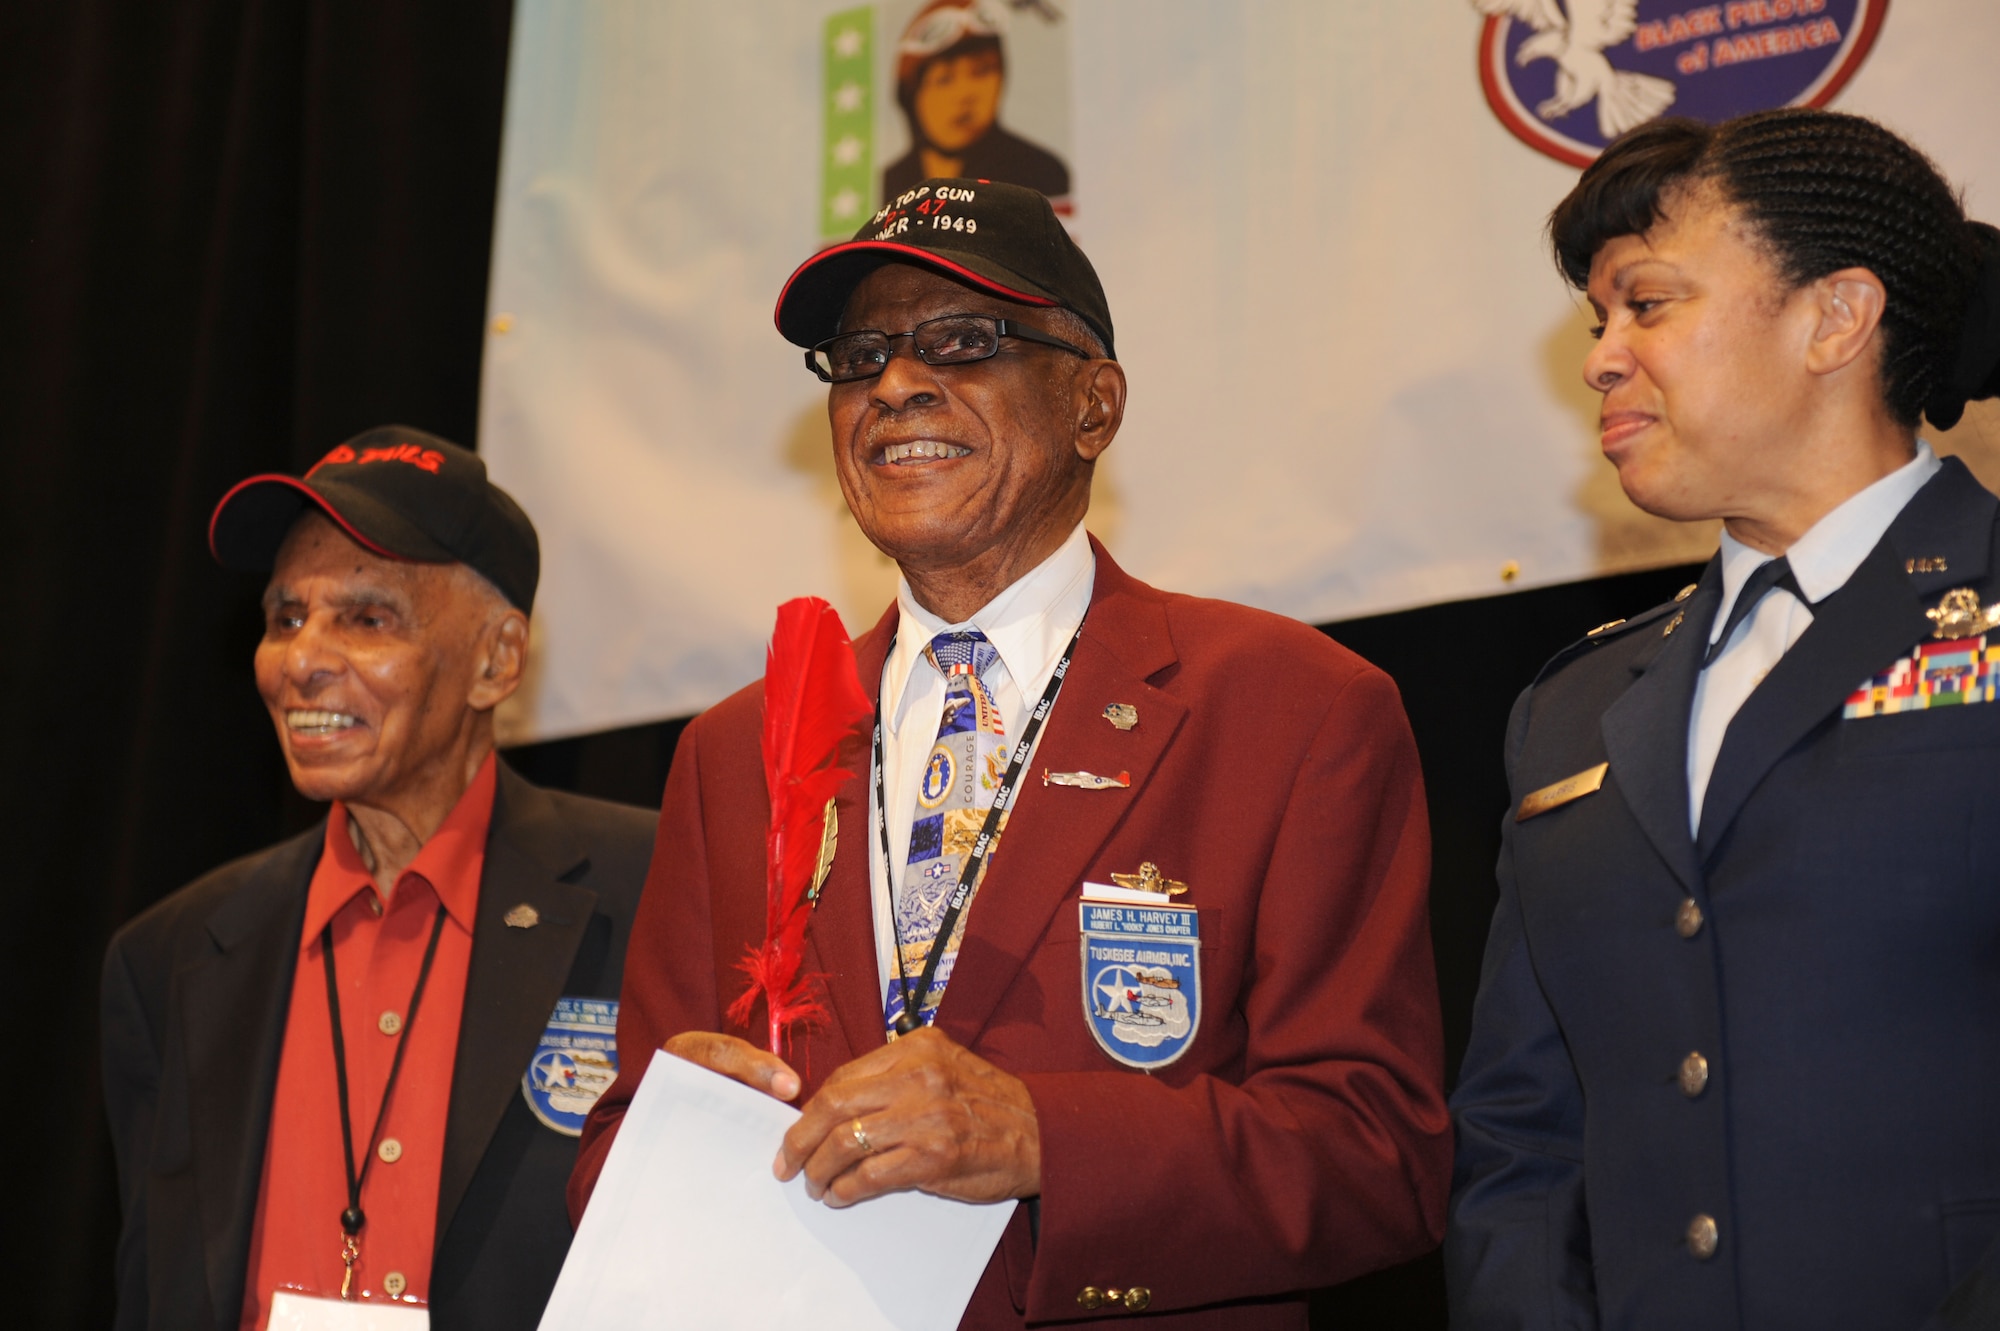 Roscoe Brown Jr., Tuskegee Airman, and U.S. Air Force Brig. Gen. Stayce Harris, U.S. Africa Command mobilization assistant to the commander, accompany U.S. Air Force retired Lt. Col. James Harvey as he receives a certificate and red feather, giving him the title of honorary member of the Red Tails Aug. 1, 2012, at the Las Vegas Hotel and Casino, Nev. Harvey was presented with the title last year at a Tuskegee reunion in Orlando, Fla., but was unable to receive the award. (U.S. Air Force photo by Staff Sgt. William P.Coleman)
  

